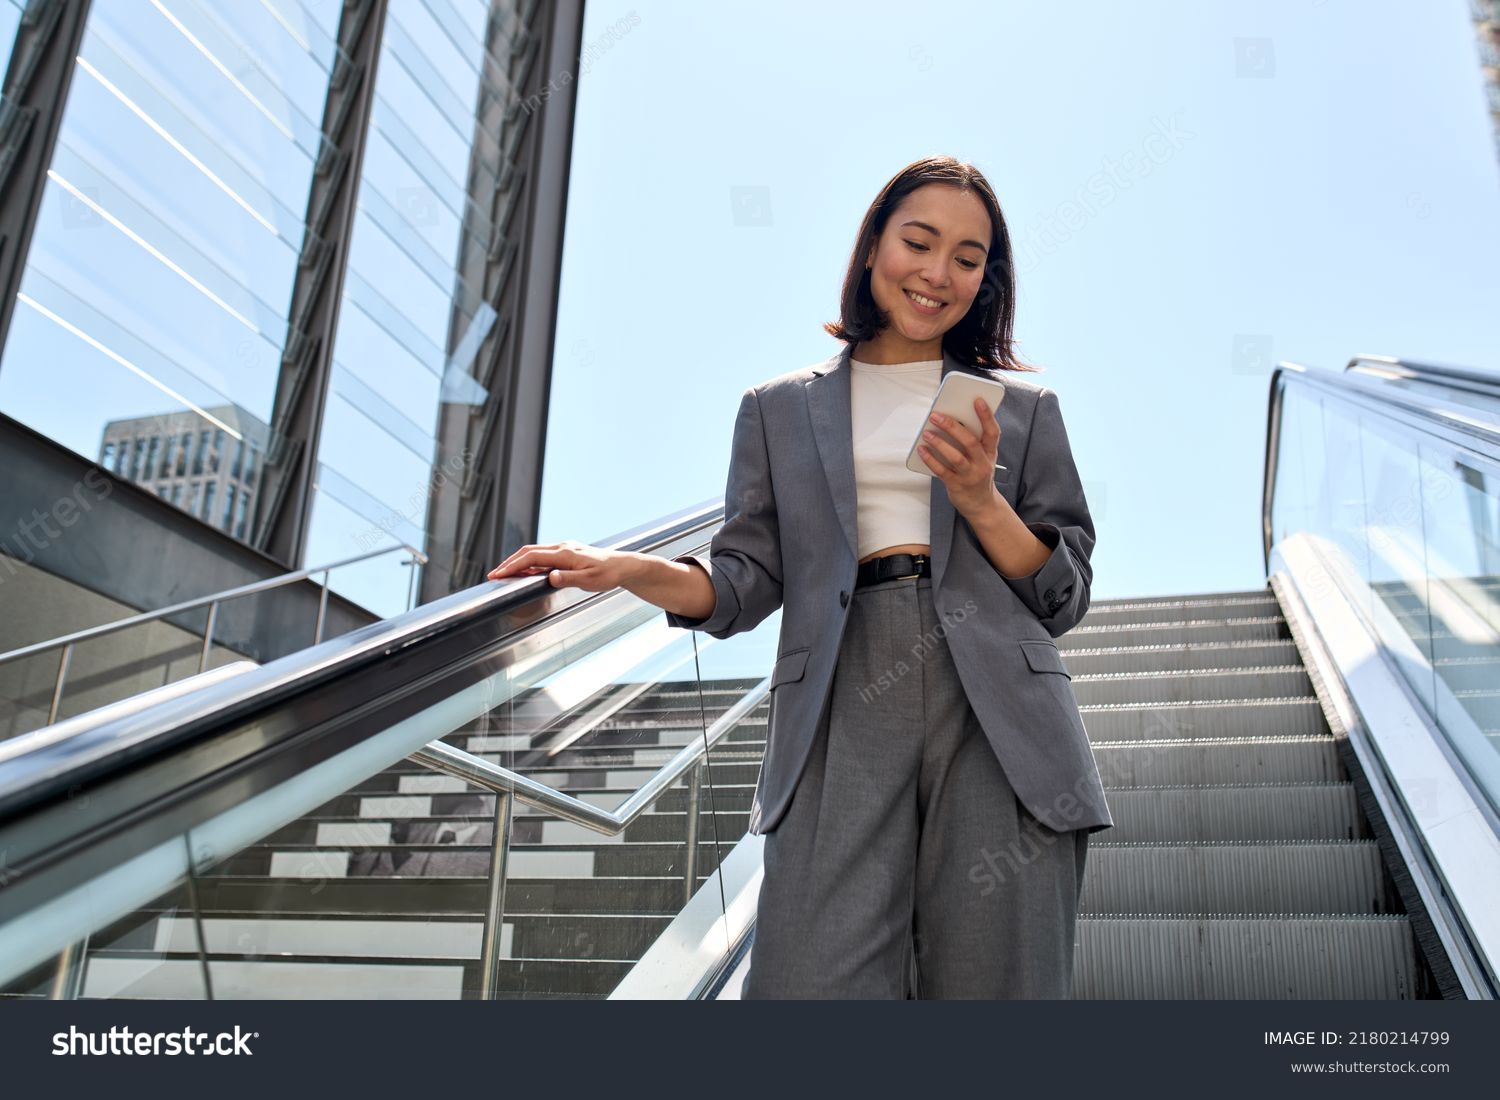 Smiling young Asian business woman wearing suit standing on urban escalator using applications on cell phone, reading news on smartphone, fast connection, checking mobile apps outdoors. #2180214799